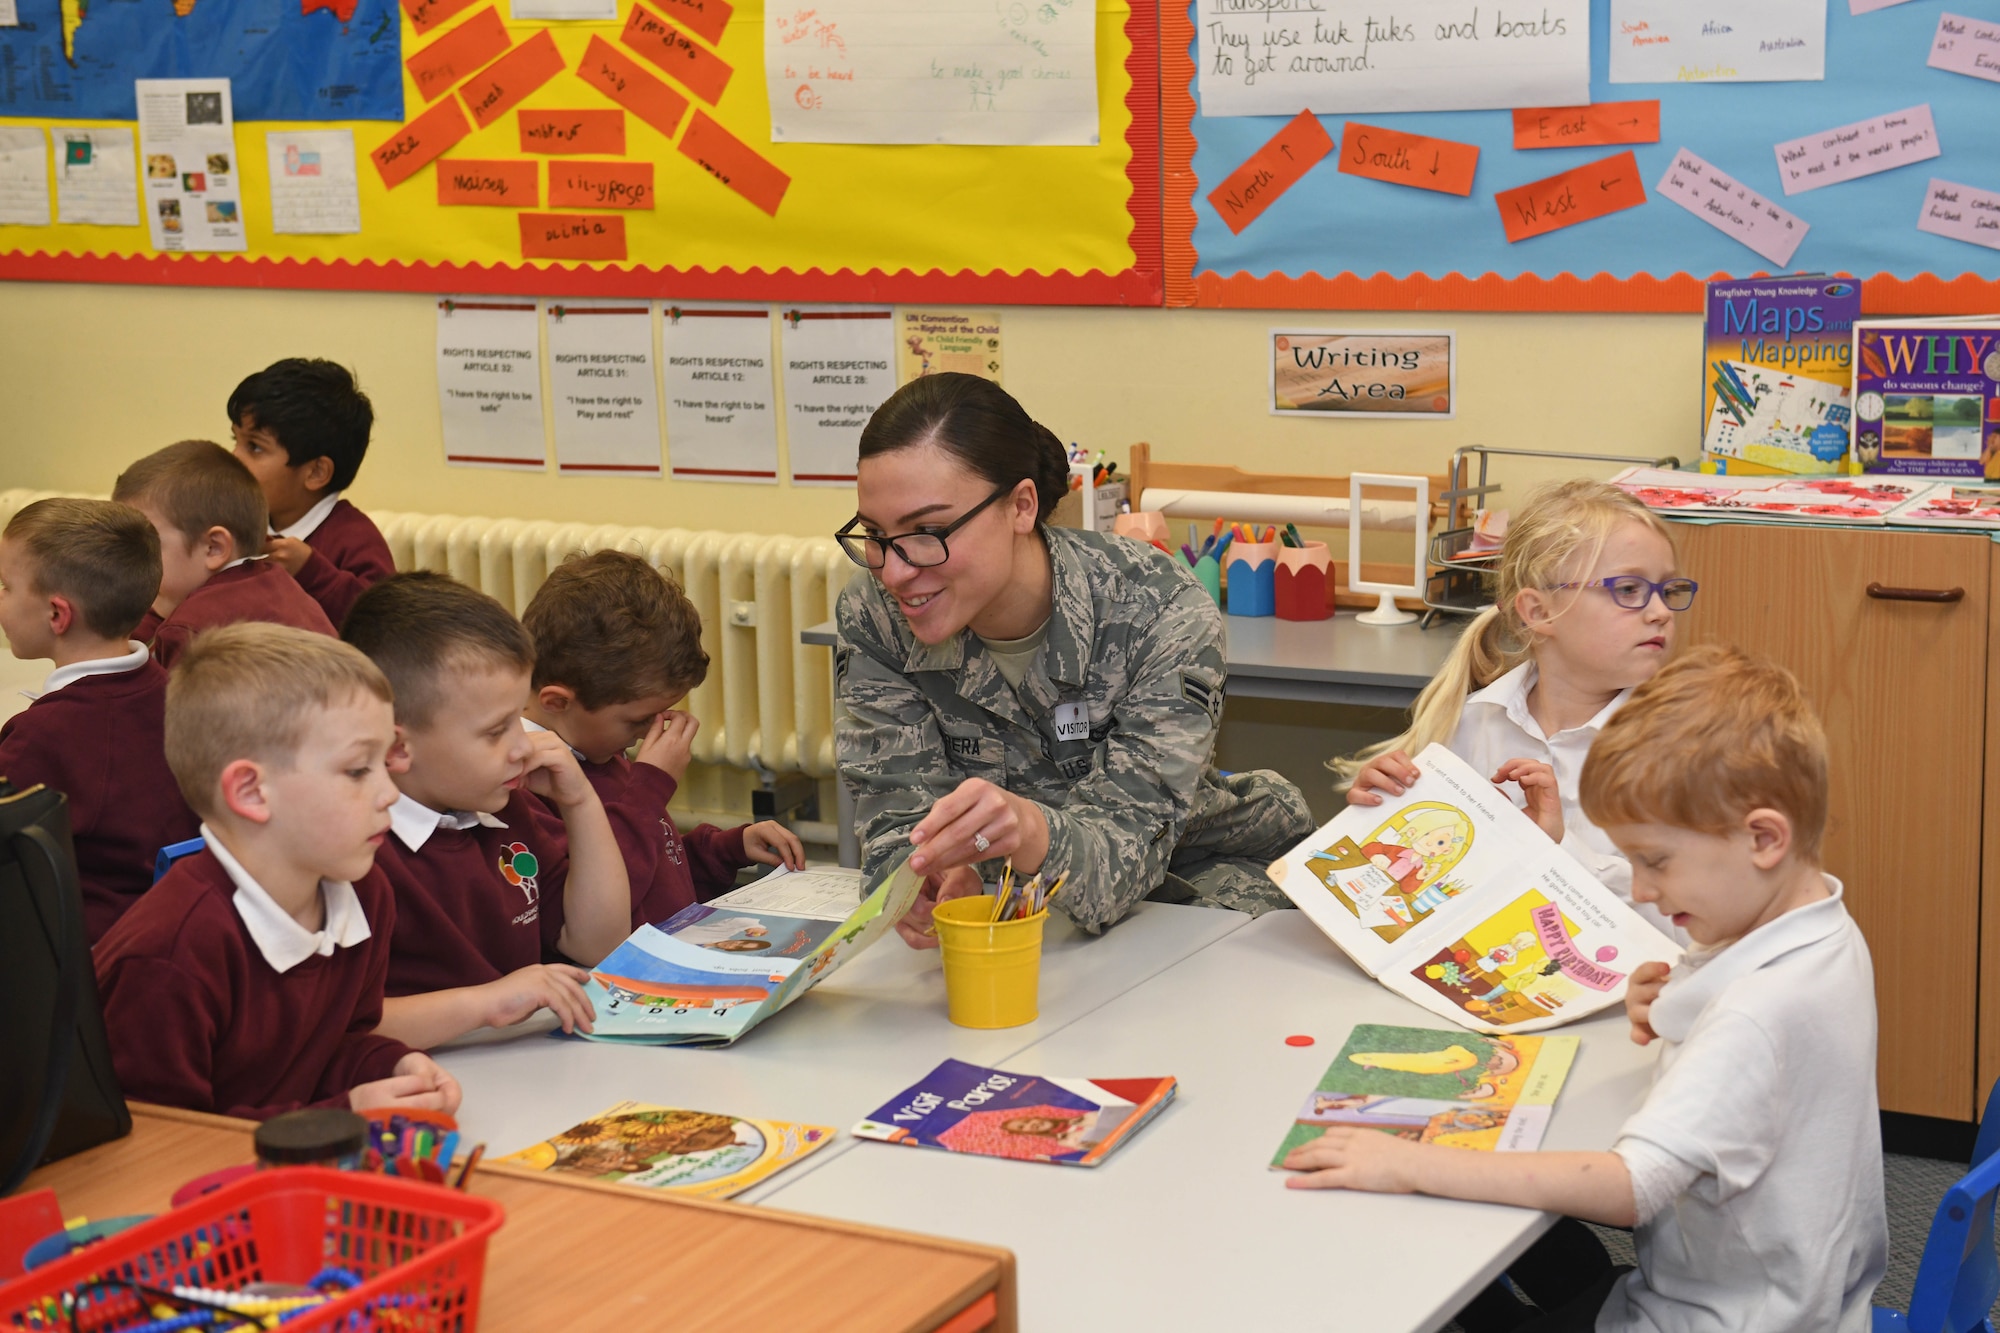 Airman 1st Class Antonia Herrera, 100th Air Refueling Wing Public Affairs broadcast journalist, reads to children at Houldsworth Valley Primary School in Newmarket, England, Nov. 26, 2019. Airmen from Team Mildenhall volunteered their time to go to the school to read books with the children and talk about their jobs on base. (U.S. Air Force photo by Senior Airman Luke Milano)